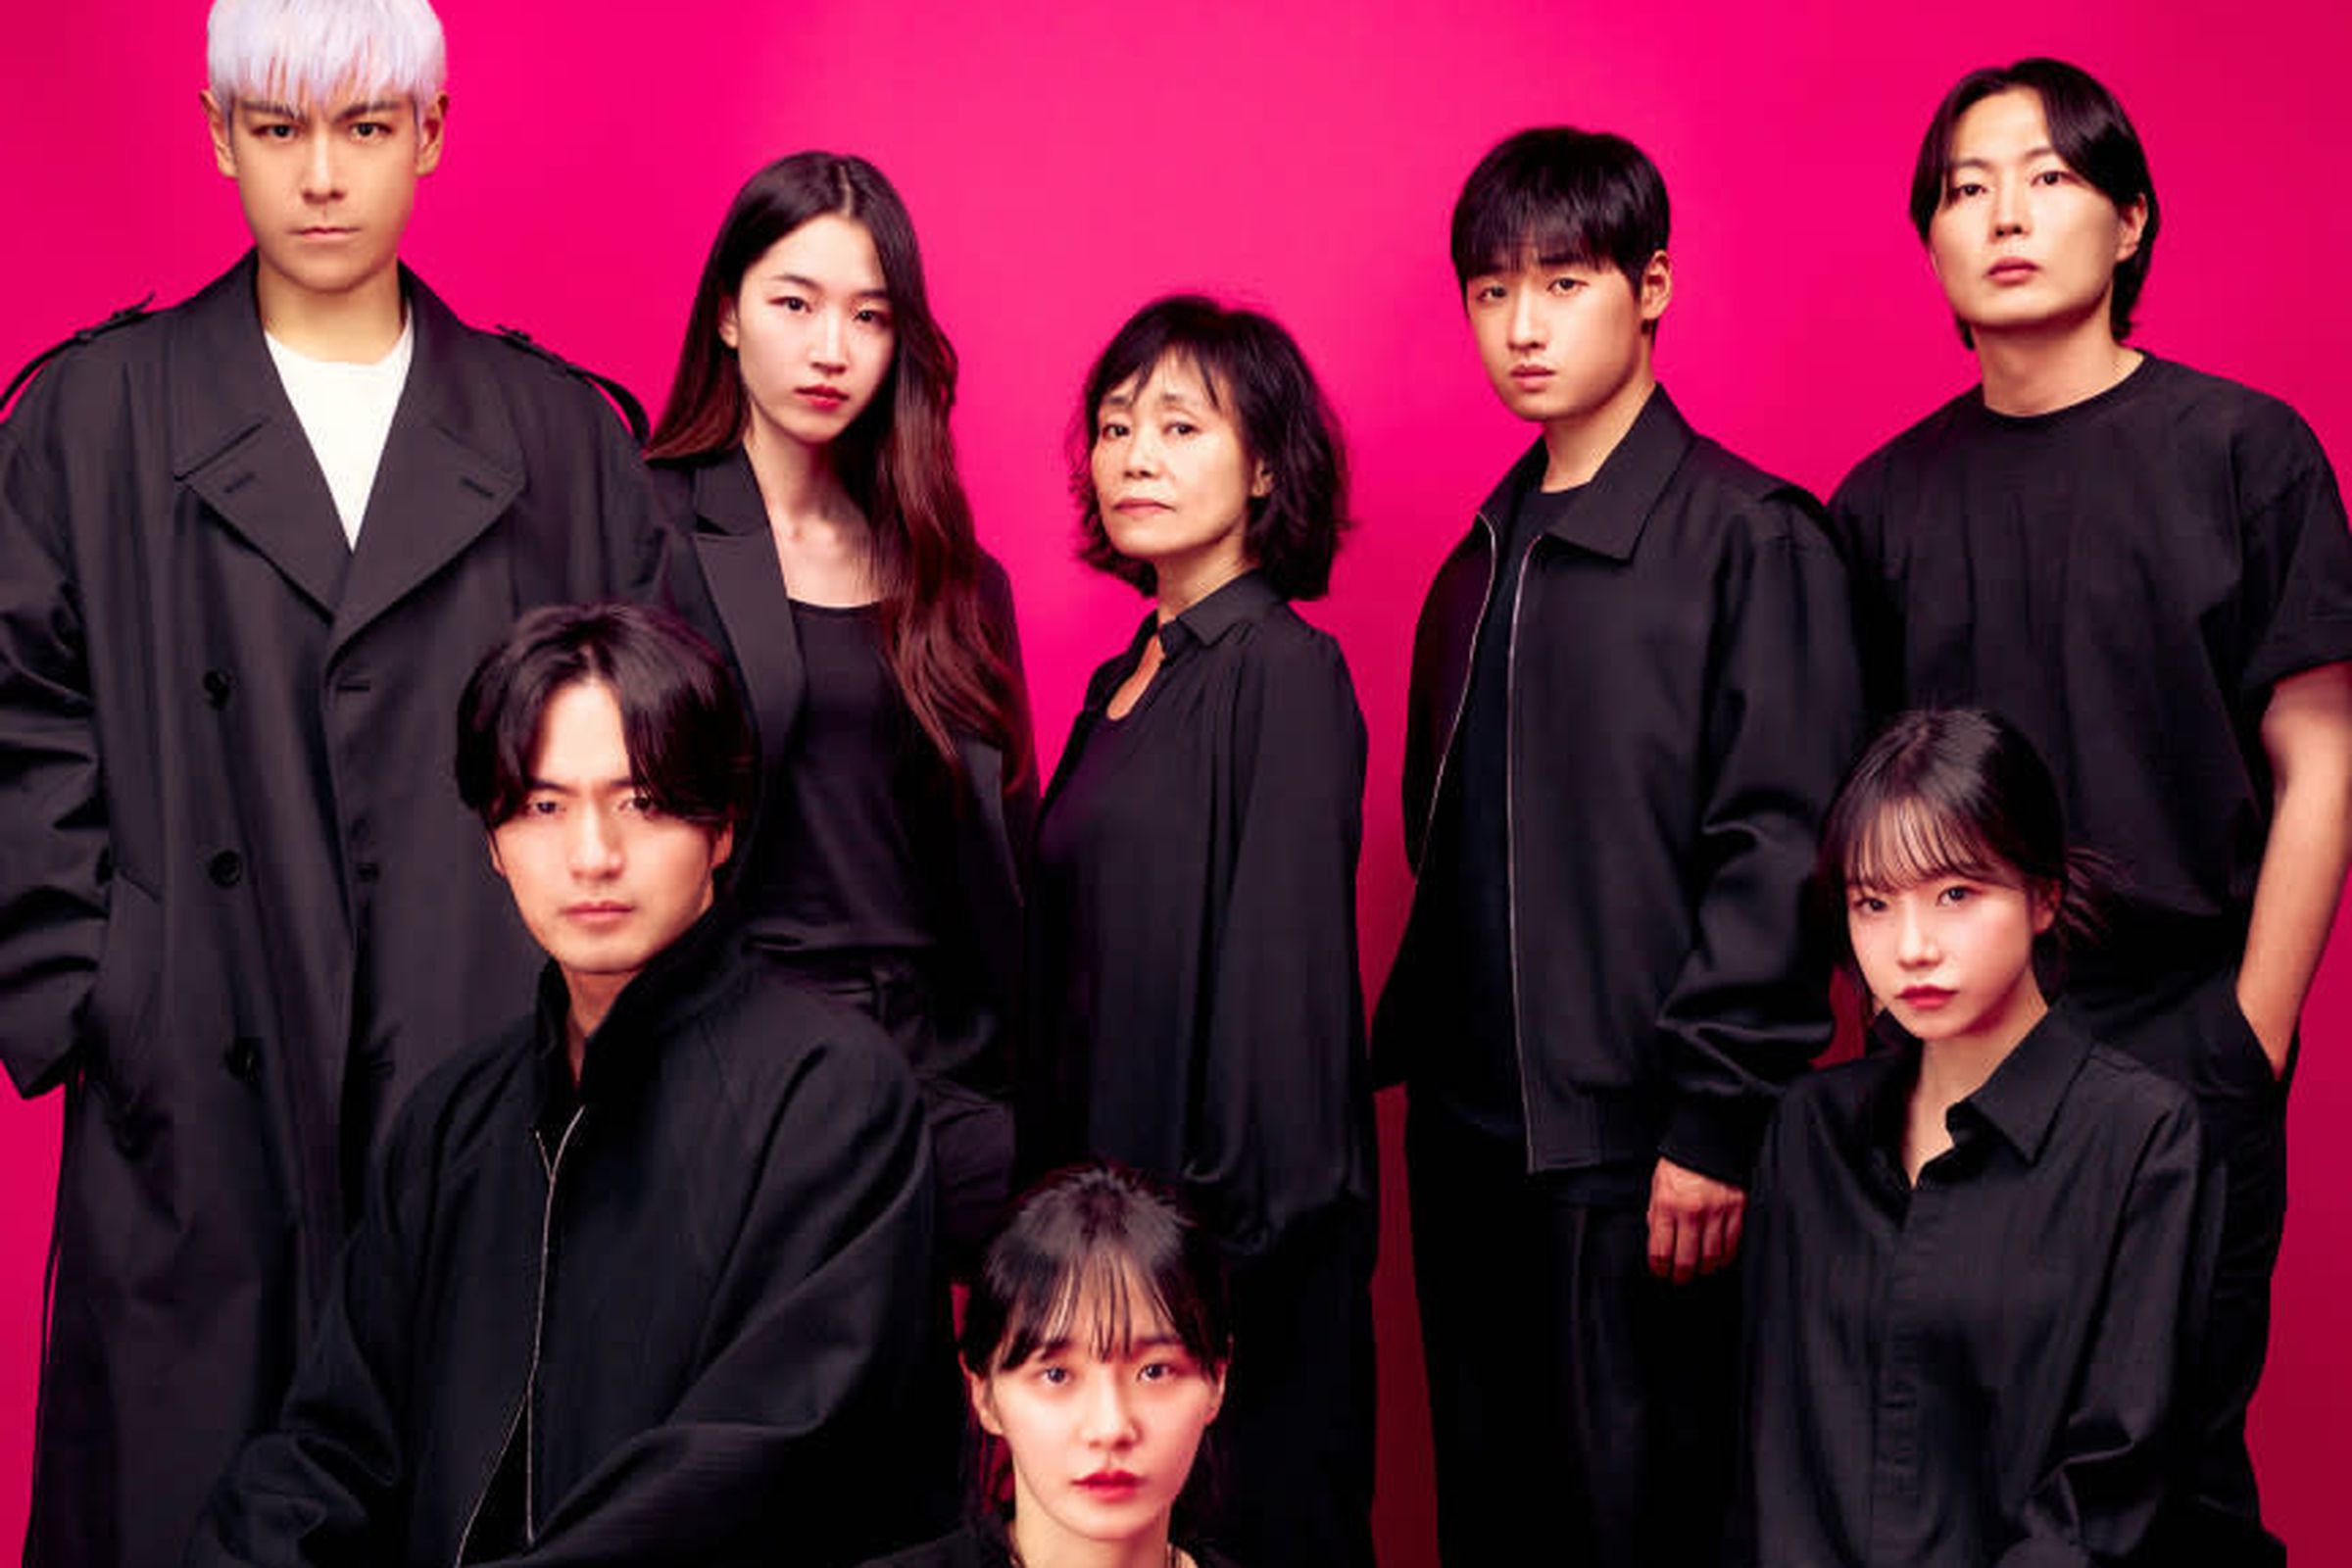 A group of eight men and women who are all wearing head-to-toe black outfits, and standing together in front of a bright pink wall.